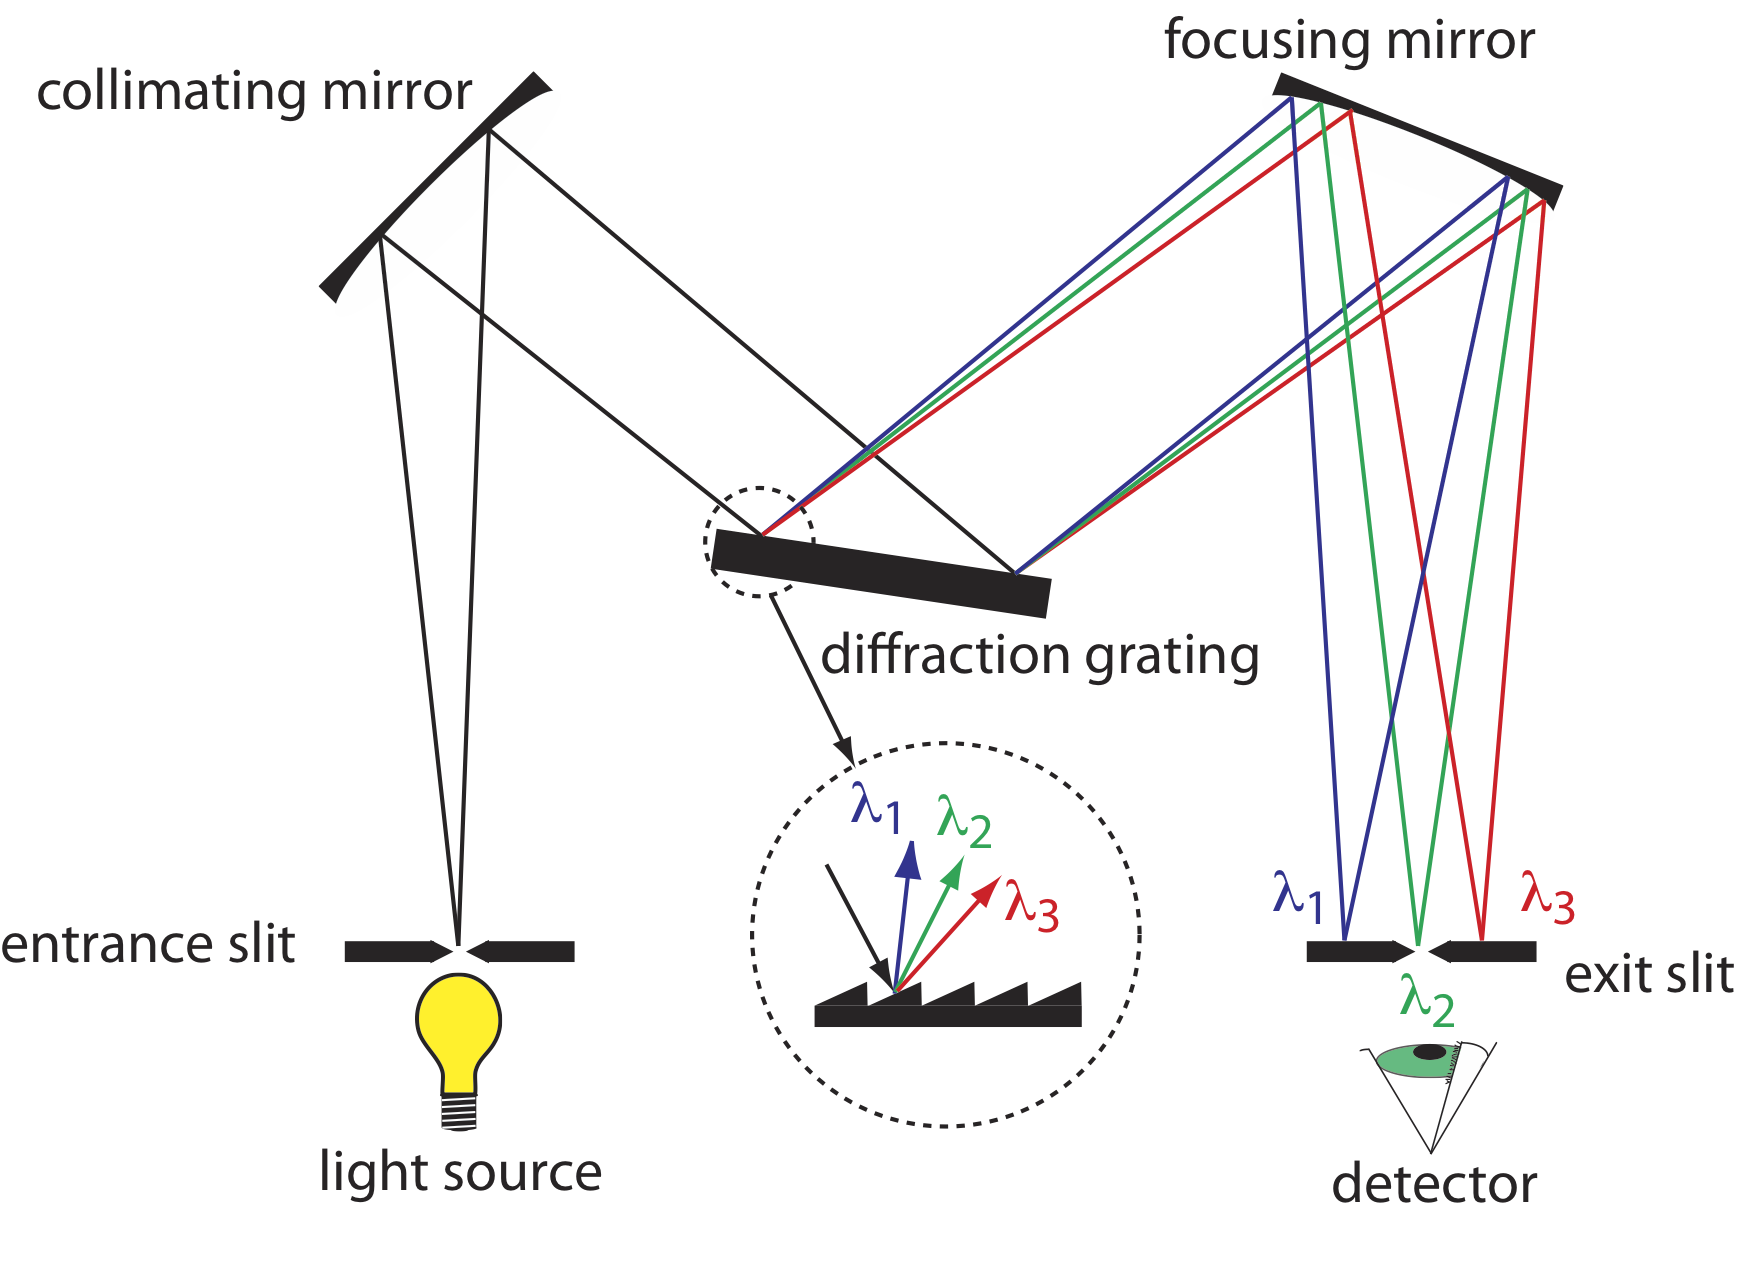 Light emanates from a light source and travels through an entrance slit. It hits a collimating mirror and its redirected toward a diffraction grating. This contact separates the different wavelengths of light which then travels to a focusing mirror. Lastly, the focused wavelengths travel through an exit slit and hit a detector. 